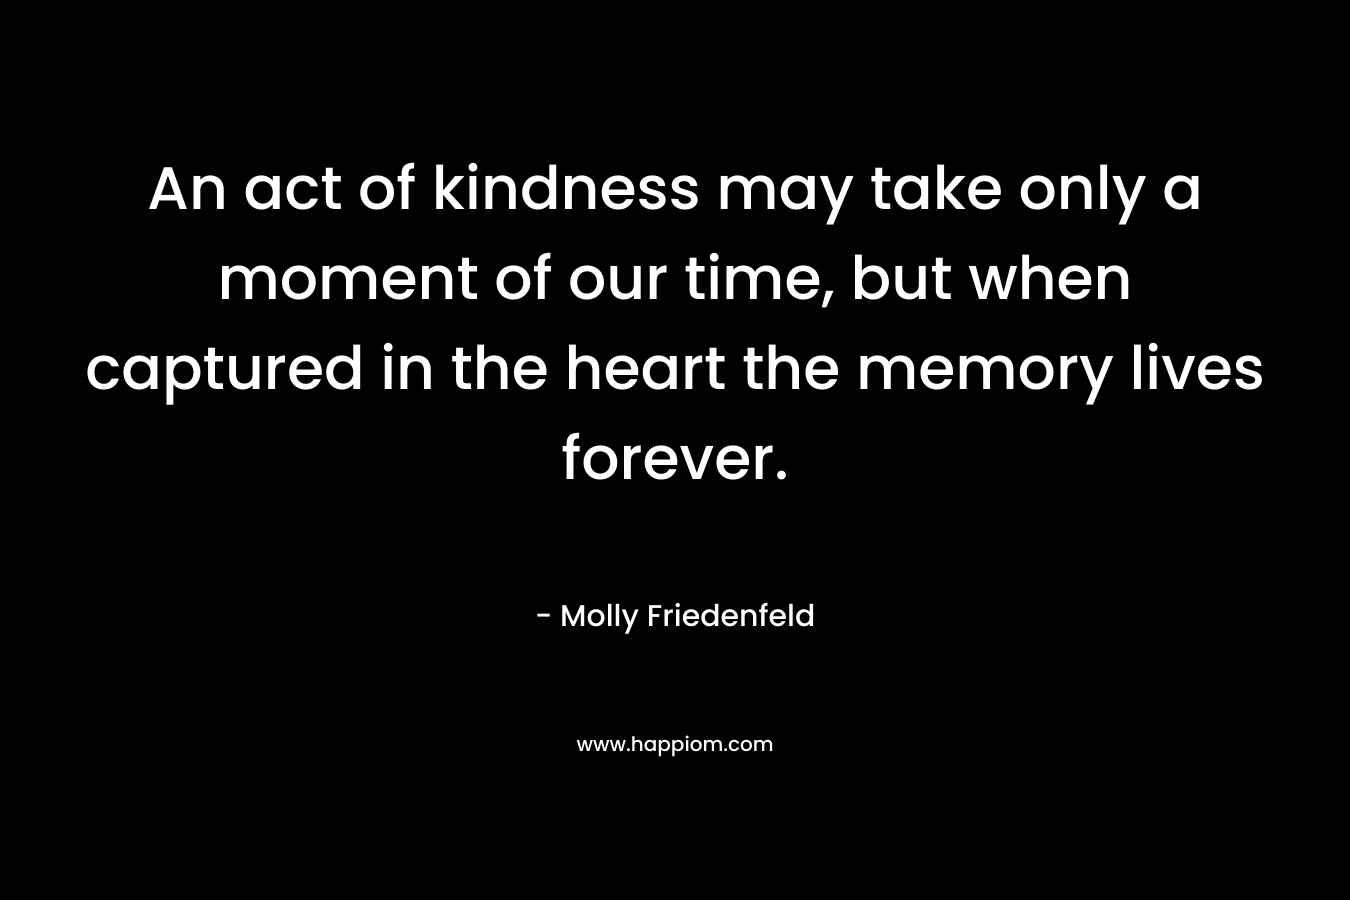 An act of kindness may take only a moment of our time, but when captured in the heart the memory lives forever.